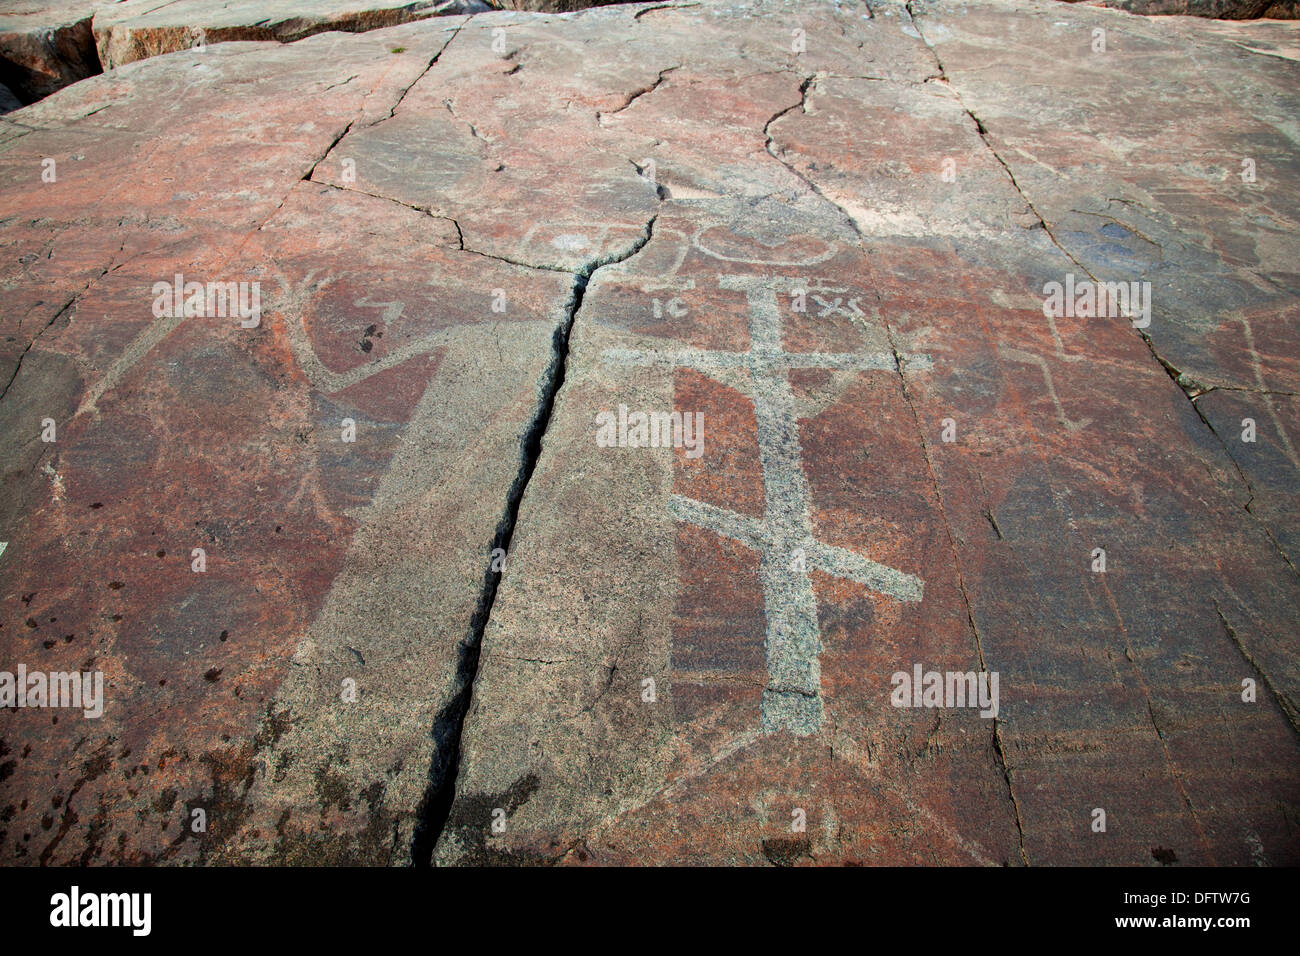 Mysterious petroglyphs of Onega. Made 6000 - 5000 years ago. Stock Photo